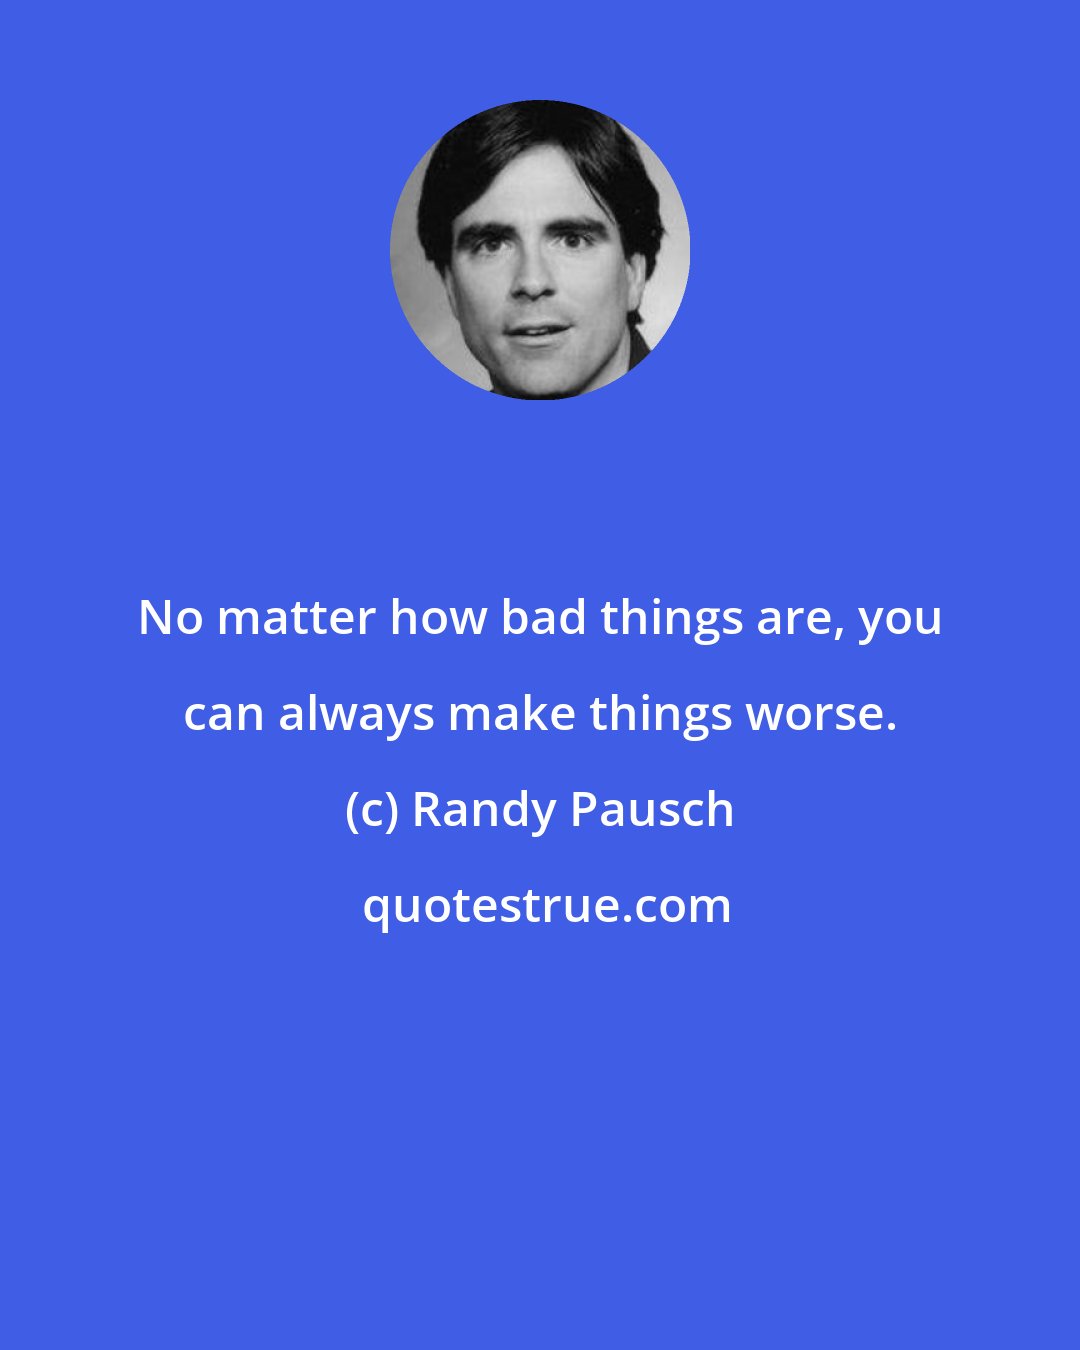 Randy Pausch: No matter how bad things are, you can always make things worse.